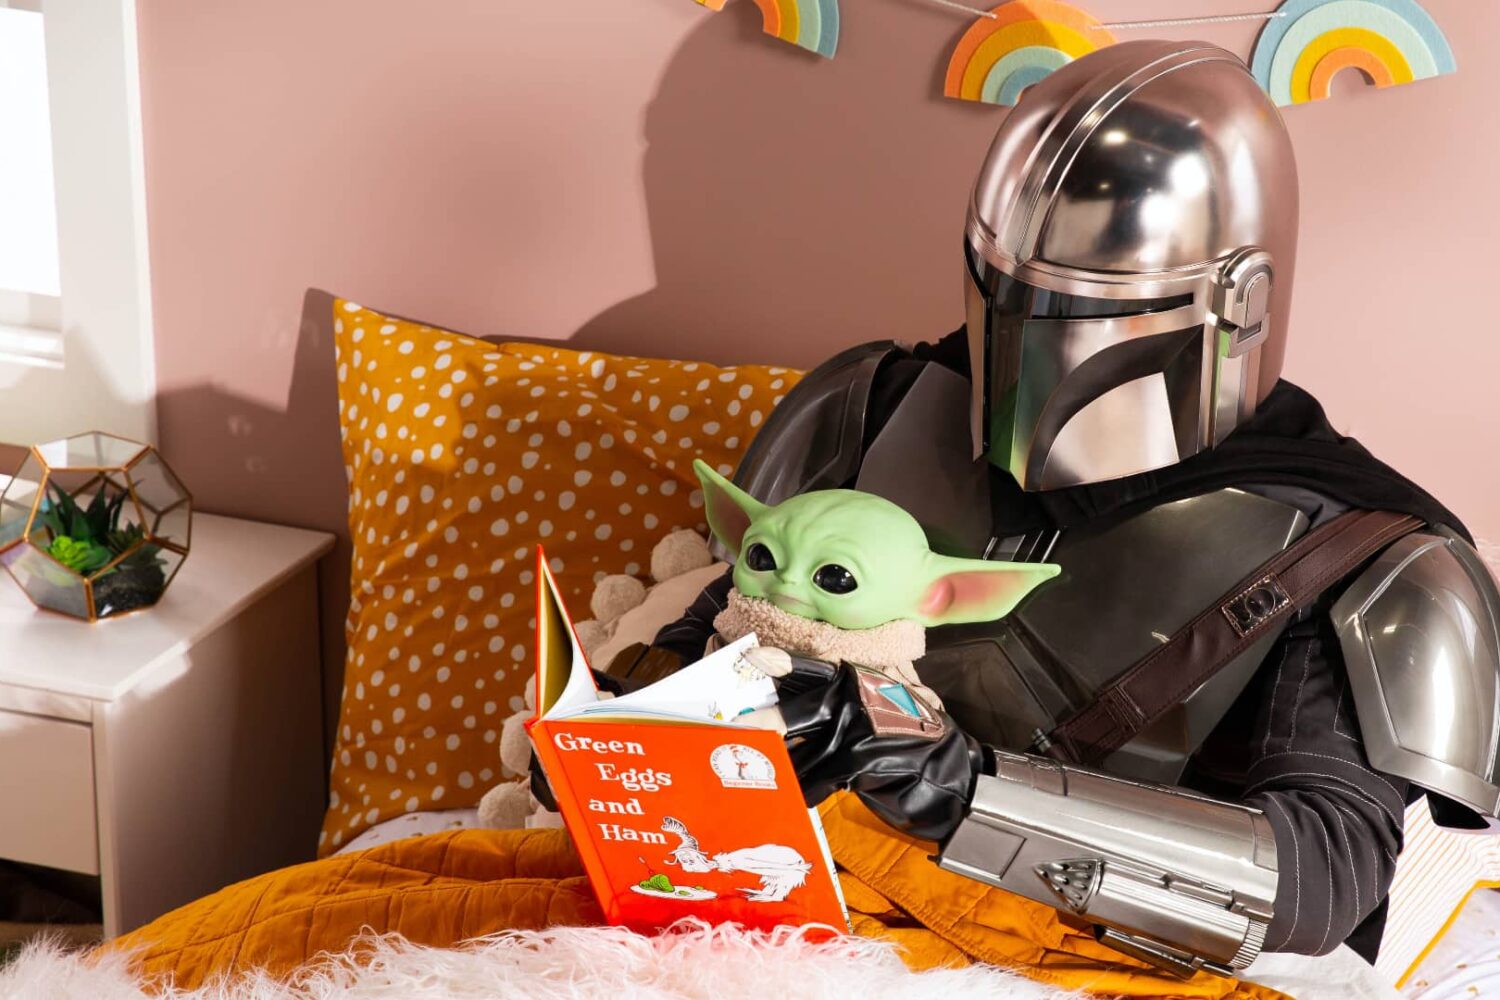 The Mandalorian and Grogu lying together in bed, reading a book